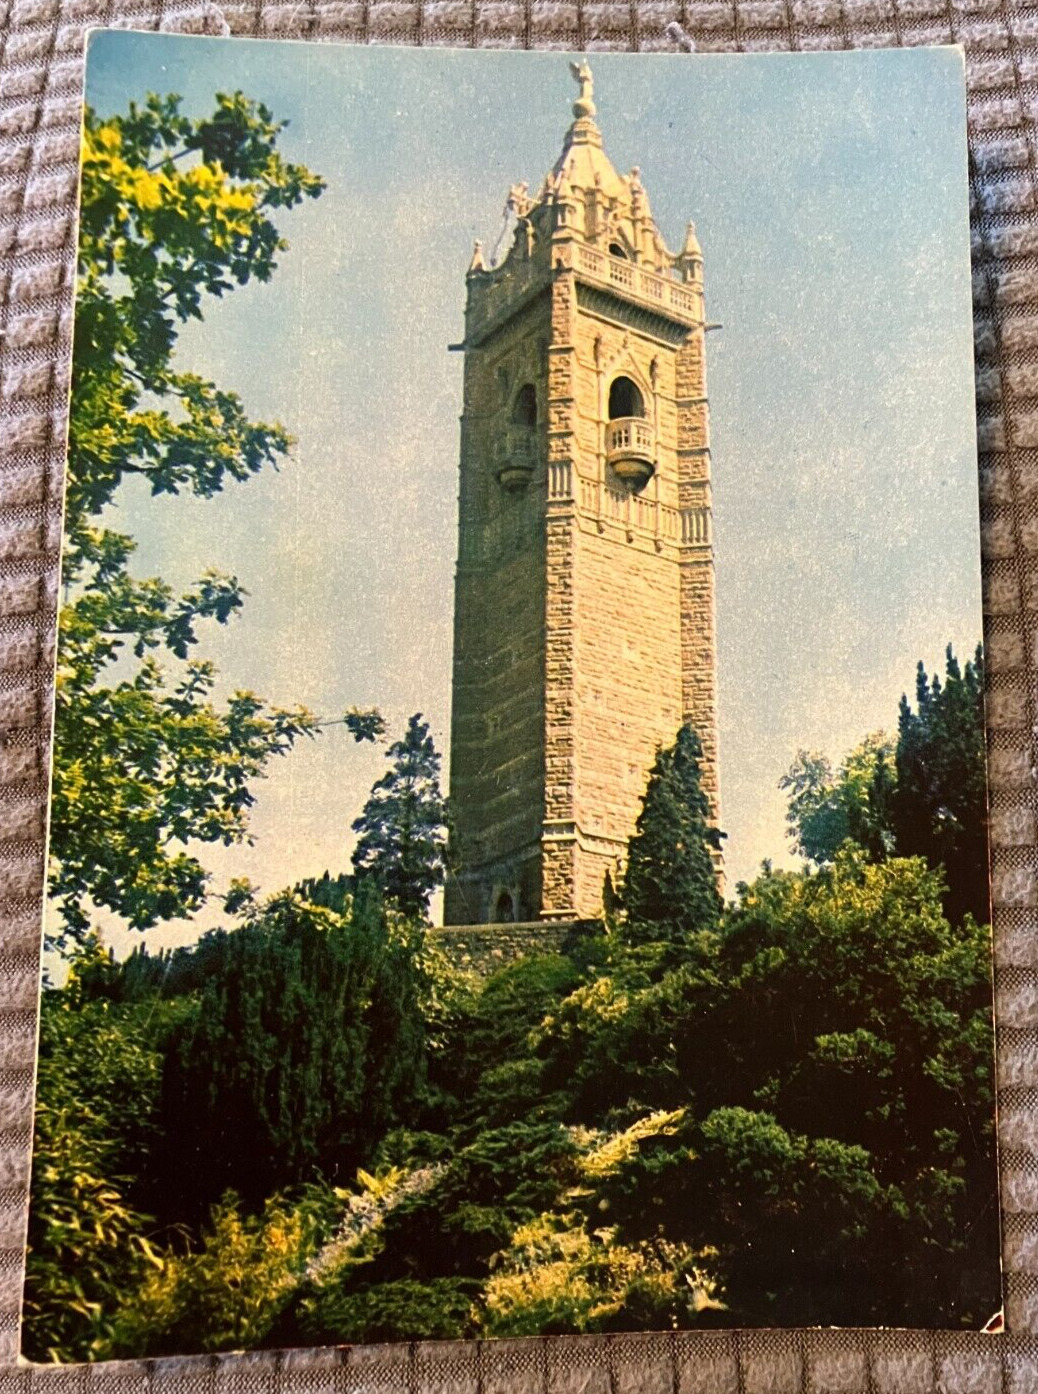 Vintage Continental Postcard - Cabot Tower in Bristol, United Kingdom - UNPOSTED